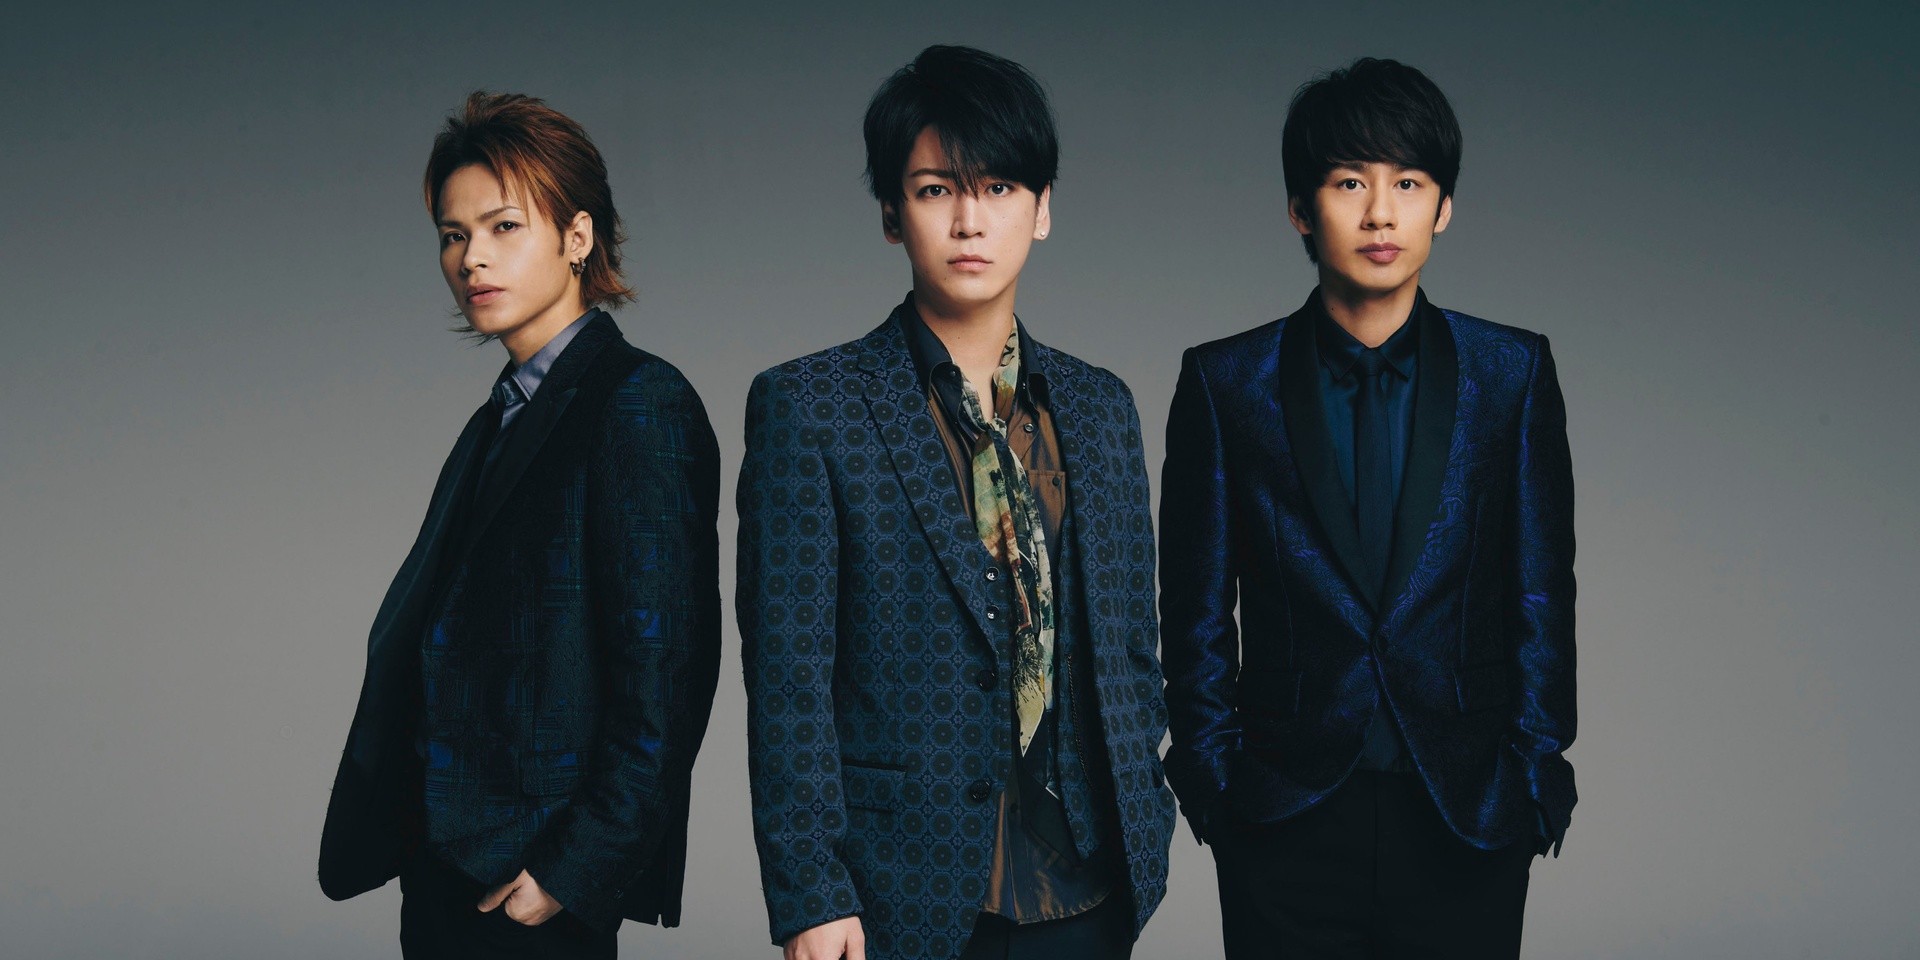 KAT-TUN's latest single 'Roar' is now available for global streaming on Spotify